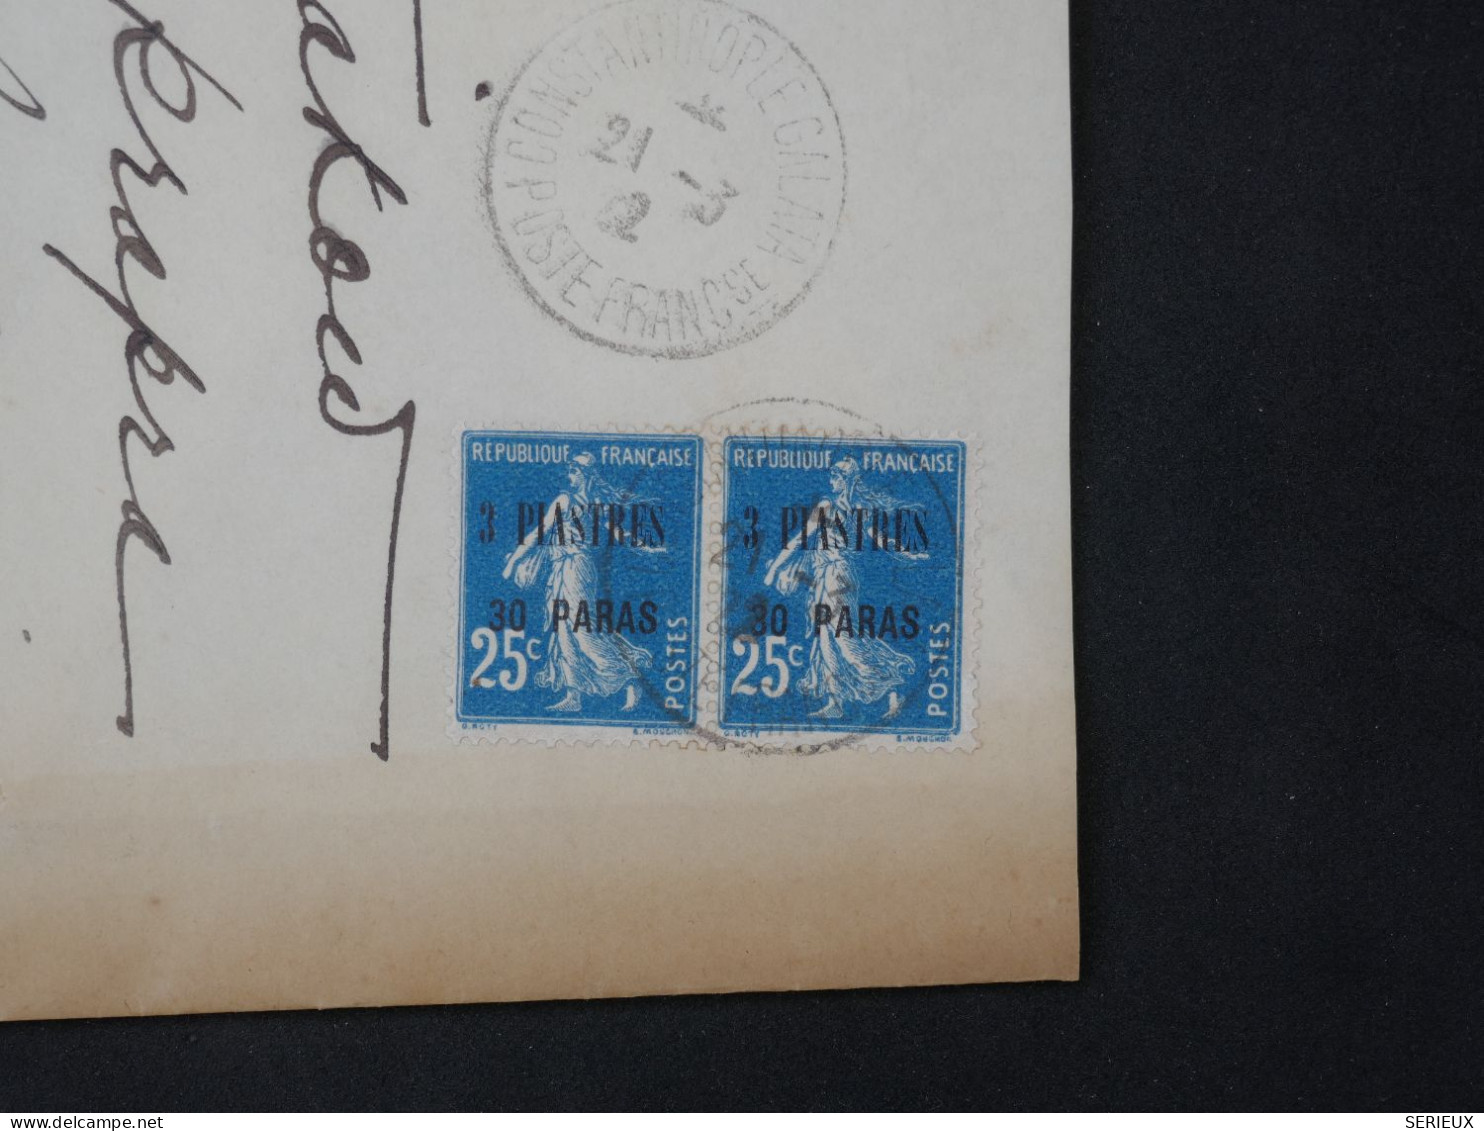 BV15 LEVANT FRANCE  BELLE LETTRE TRES RARE  1922 AMERICAN AMBASSY CONSTANTINOPLE A SOFIA BULGARIE   +2X TP SURCHARGE+ - Lettres & Documents